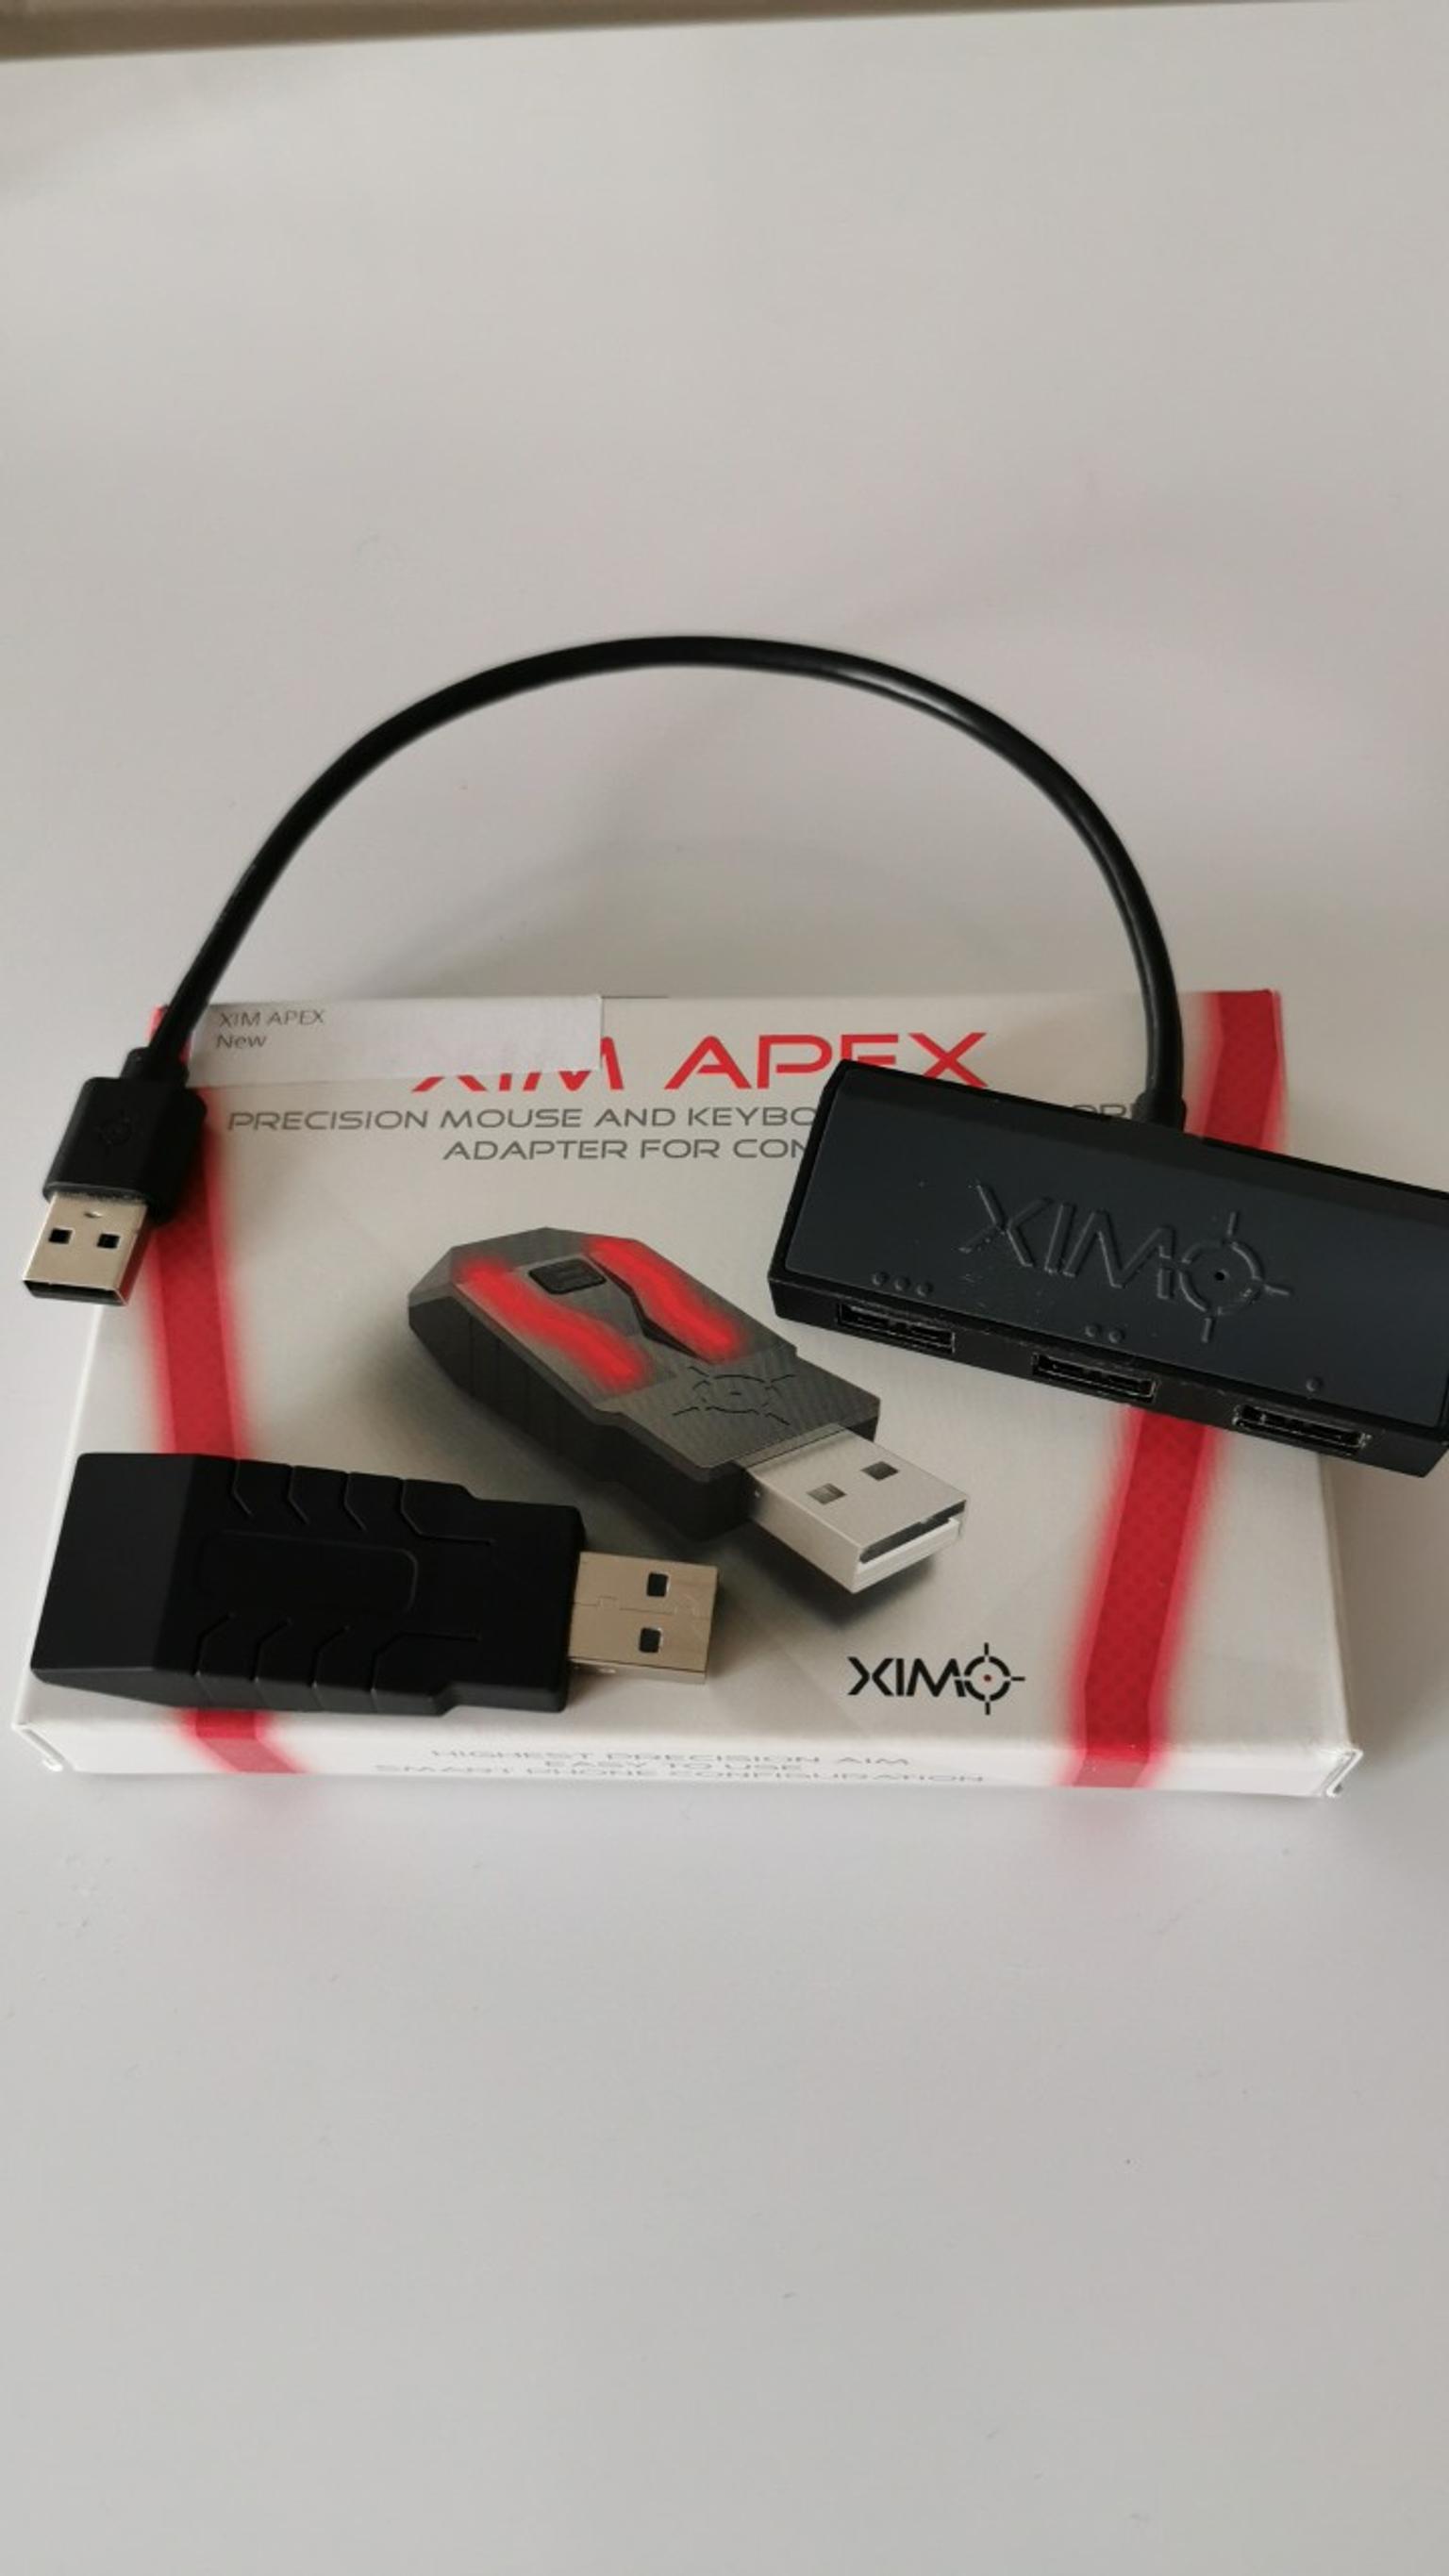 XIM Apex for PS4 and Xbox One in KT13 Elmbridge for £70.00 for sale | Shpock